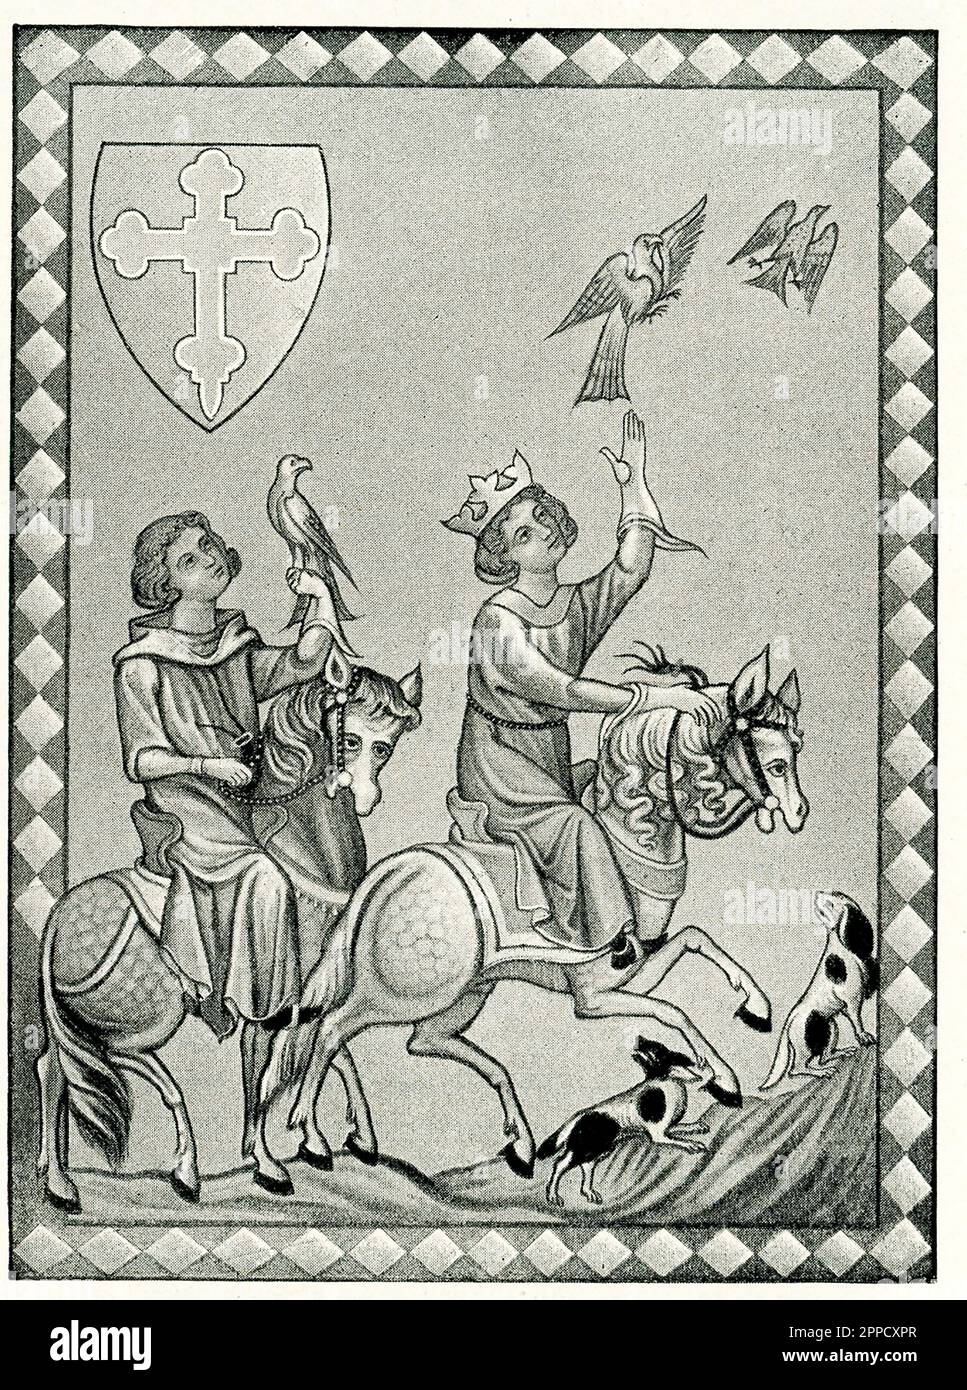 The 1909 caption reads: “King Konrad the Younger out on hawk hunt.” Konrad I (also Conrad I, called the Younger, was the king of East Francia from 911 to 918. He was the first king not of the Carolingian dynasty, the first to be elected by the nobility and the first to be anointed. East Francia refers to area now Germany. Stock Photo